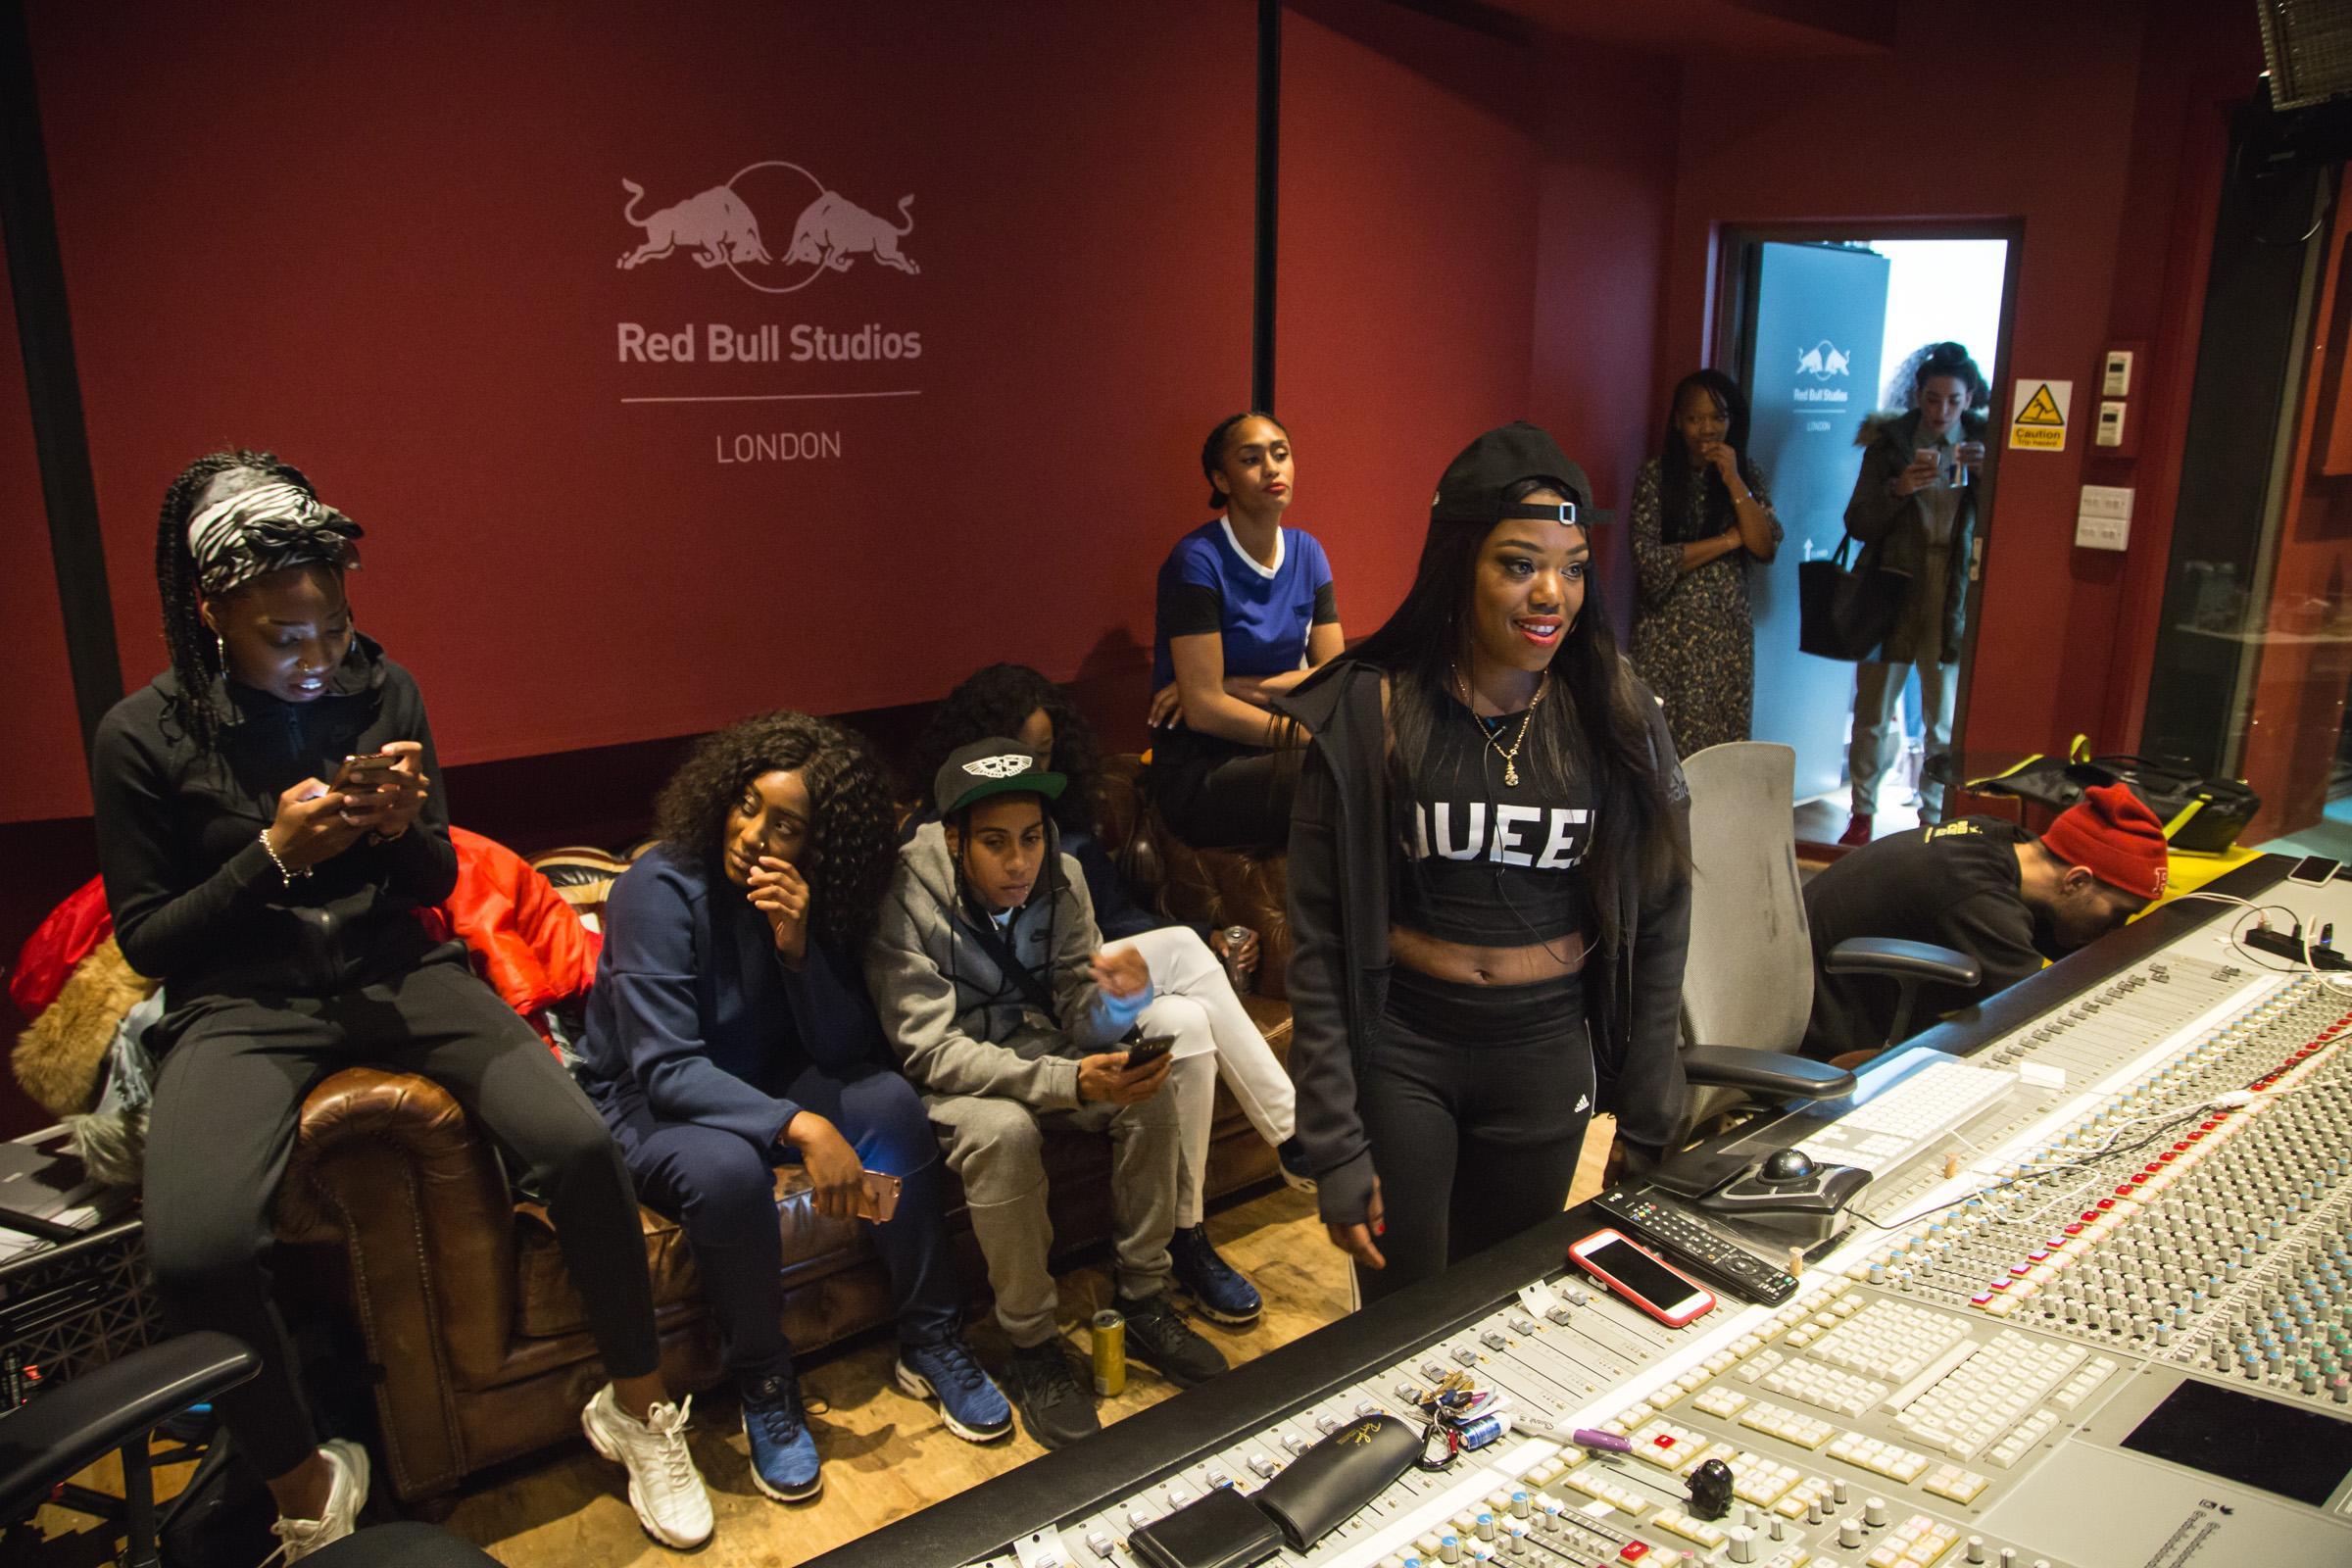 Lady Leshurr and fellow artists fly the flag for female grime at London’s Red Bull Studios